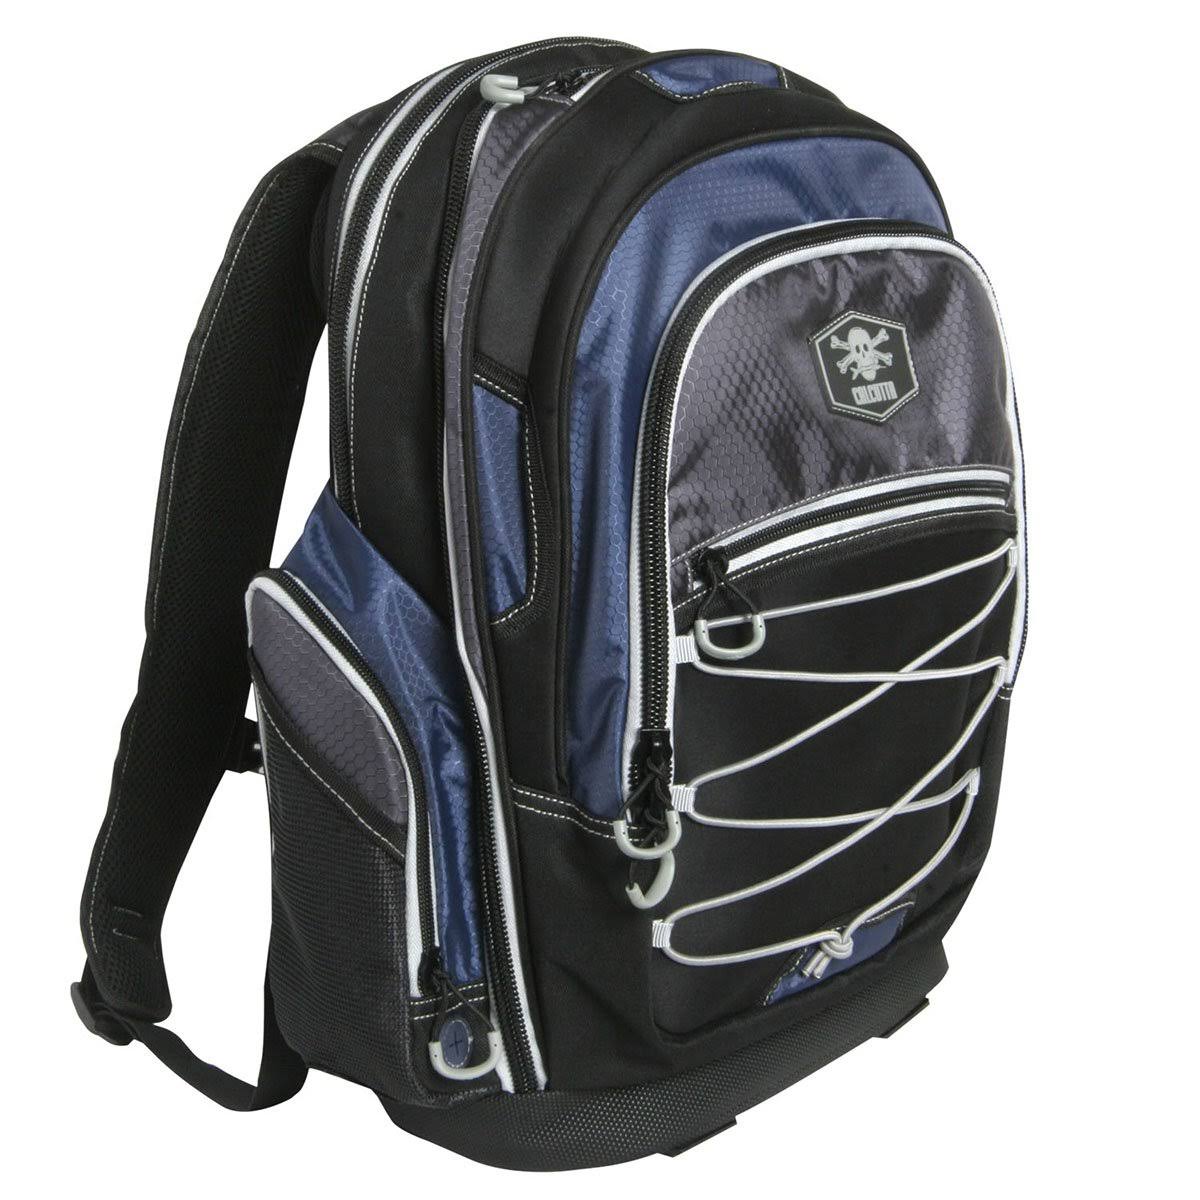 Calcutta Explorer Backpack - with 2 3600 Trays and Laptop Pouch